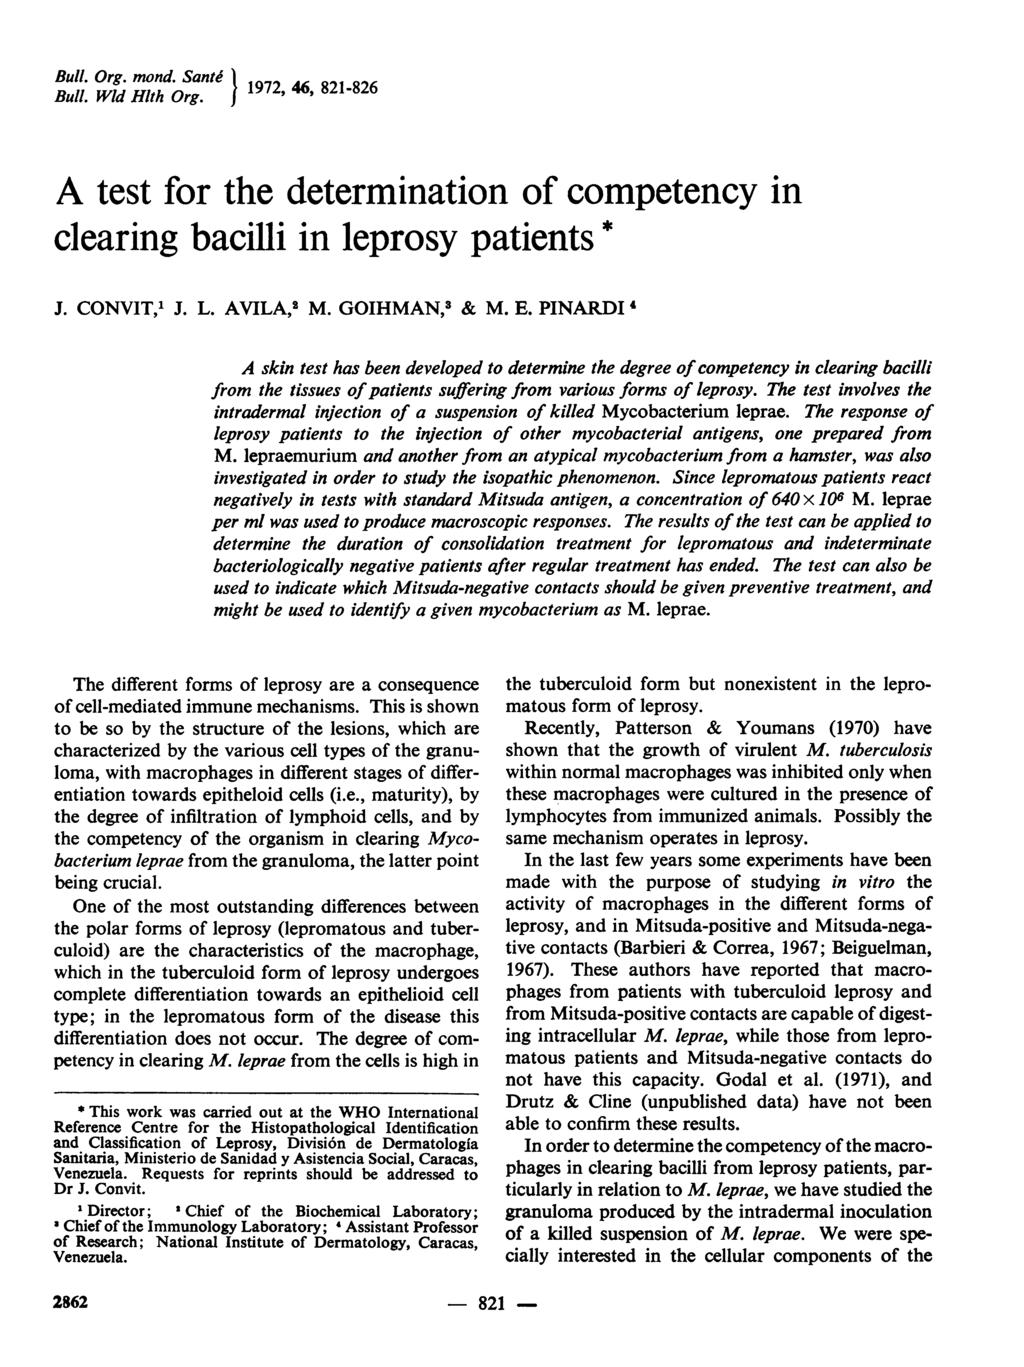 Bull. Org. mond. Sant# 1972, 46, 821-826 Bull. Wld Hlth Org. A test for the determination of competency in clearing bacilli in leprosy patients * J. CONVIT,1 J. L. AVILA,2 M. GOIHMAN,3 & M. E.